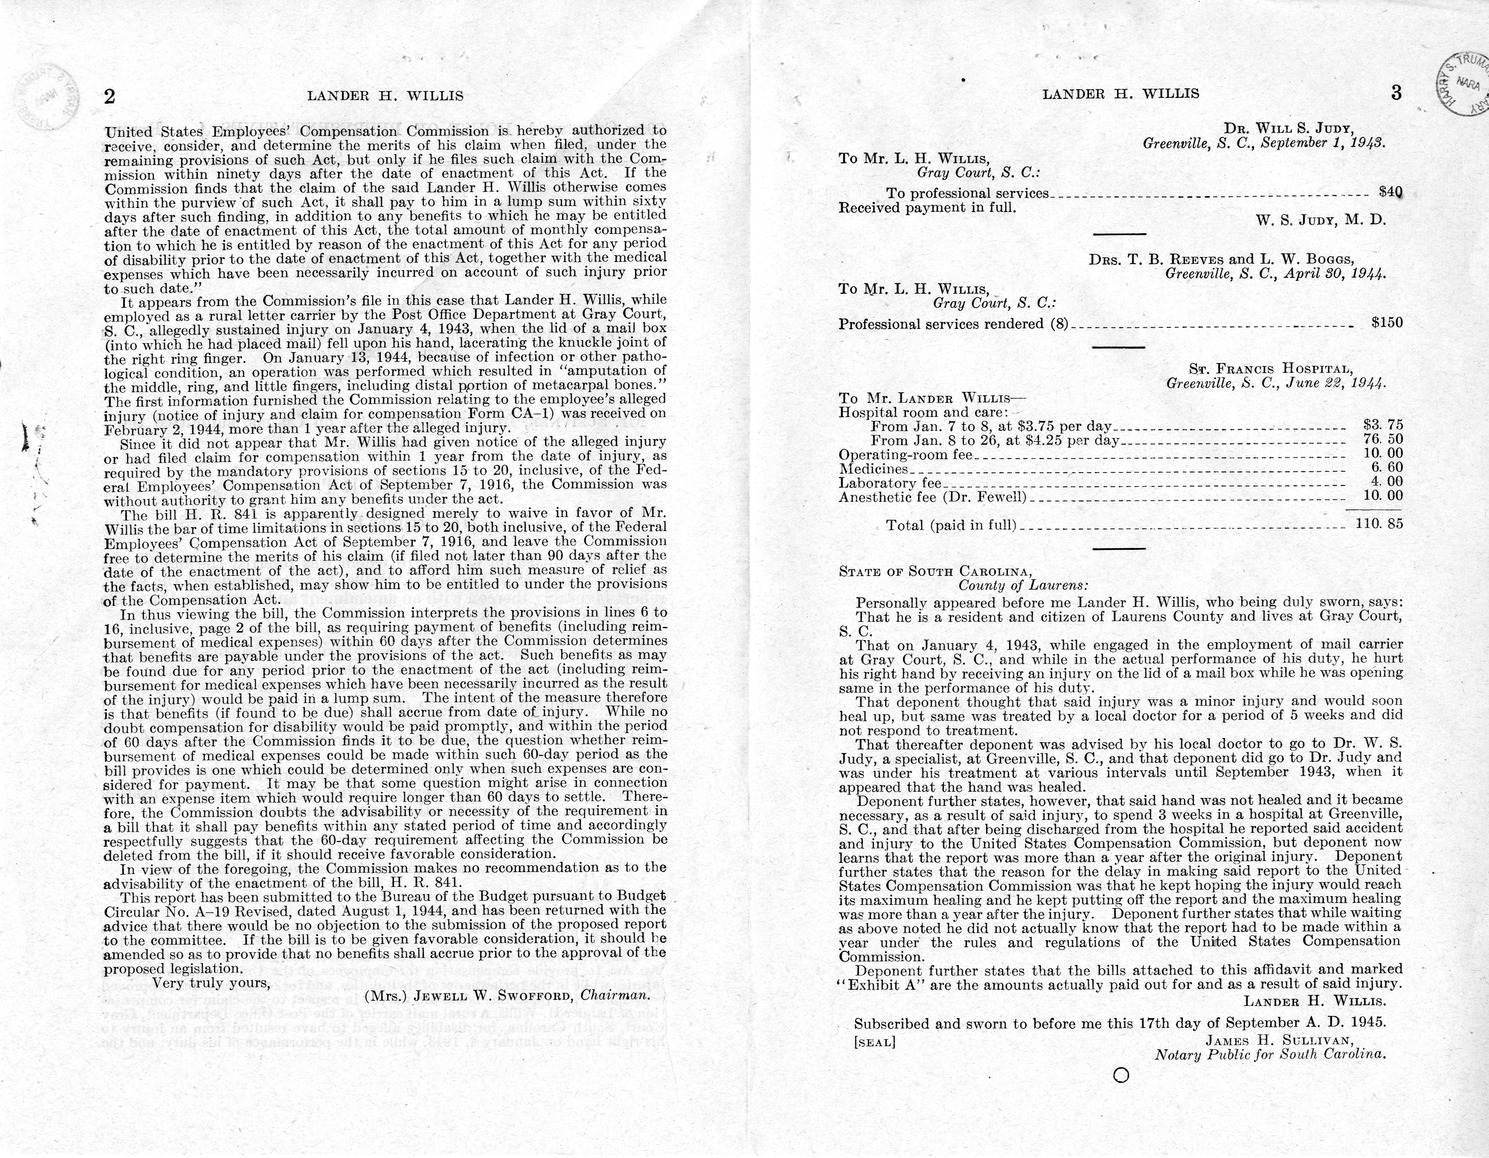 Memorandum from Frederick J. Bailey to M. C. Latta, H. R. 841, For the Relief of Lander H. Willis, with Attachments